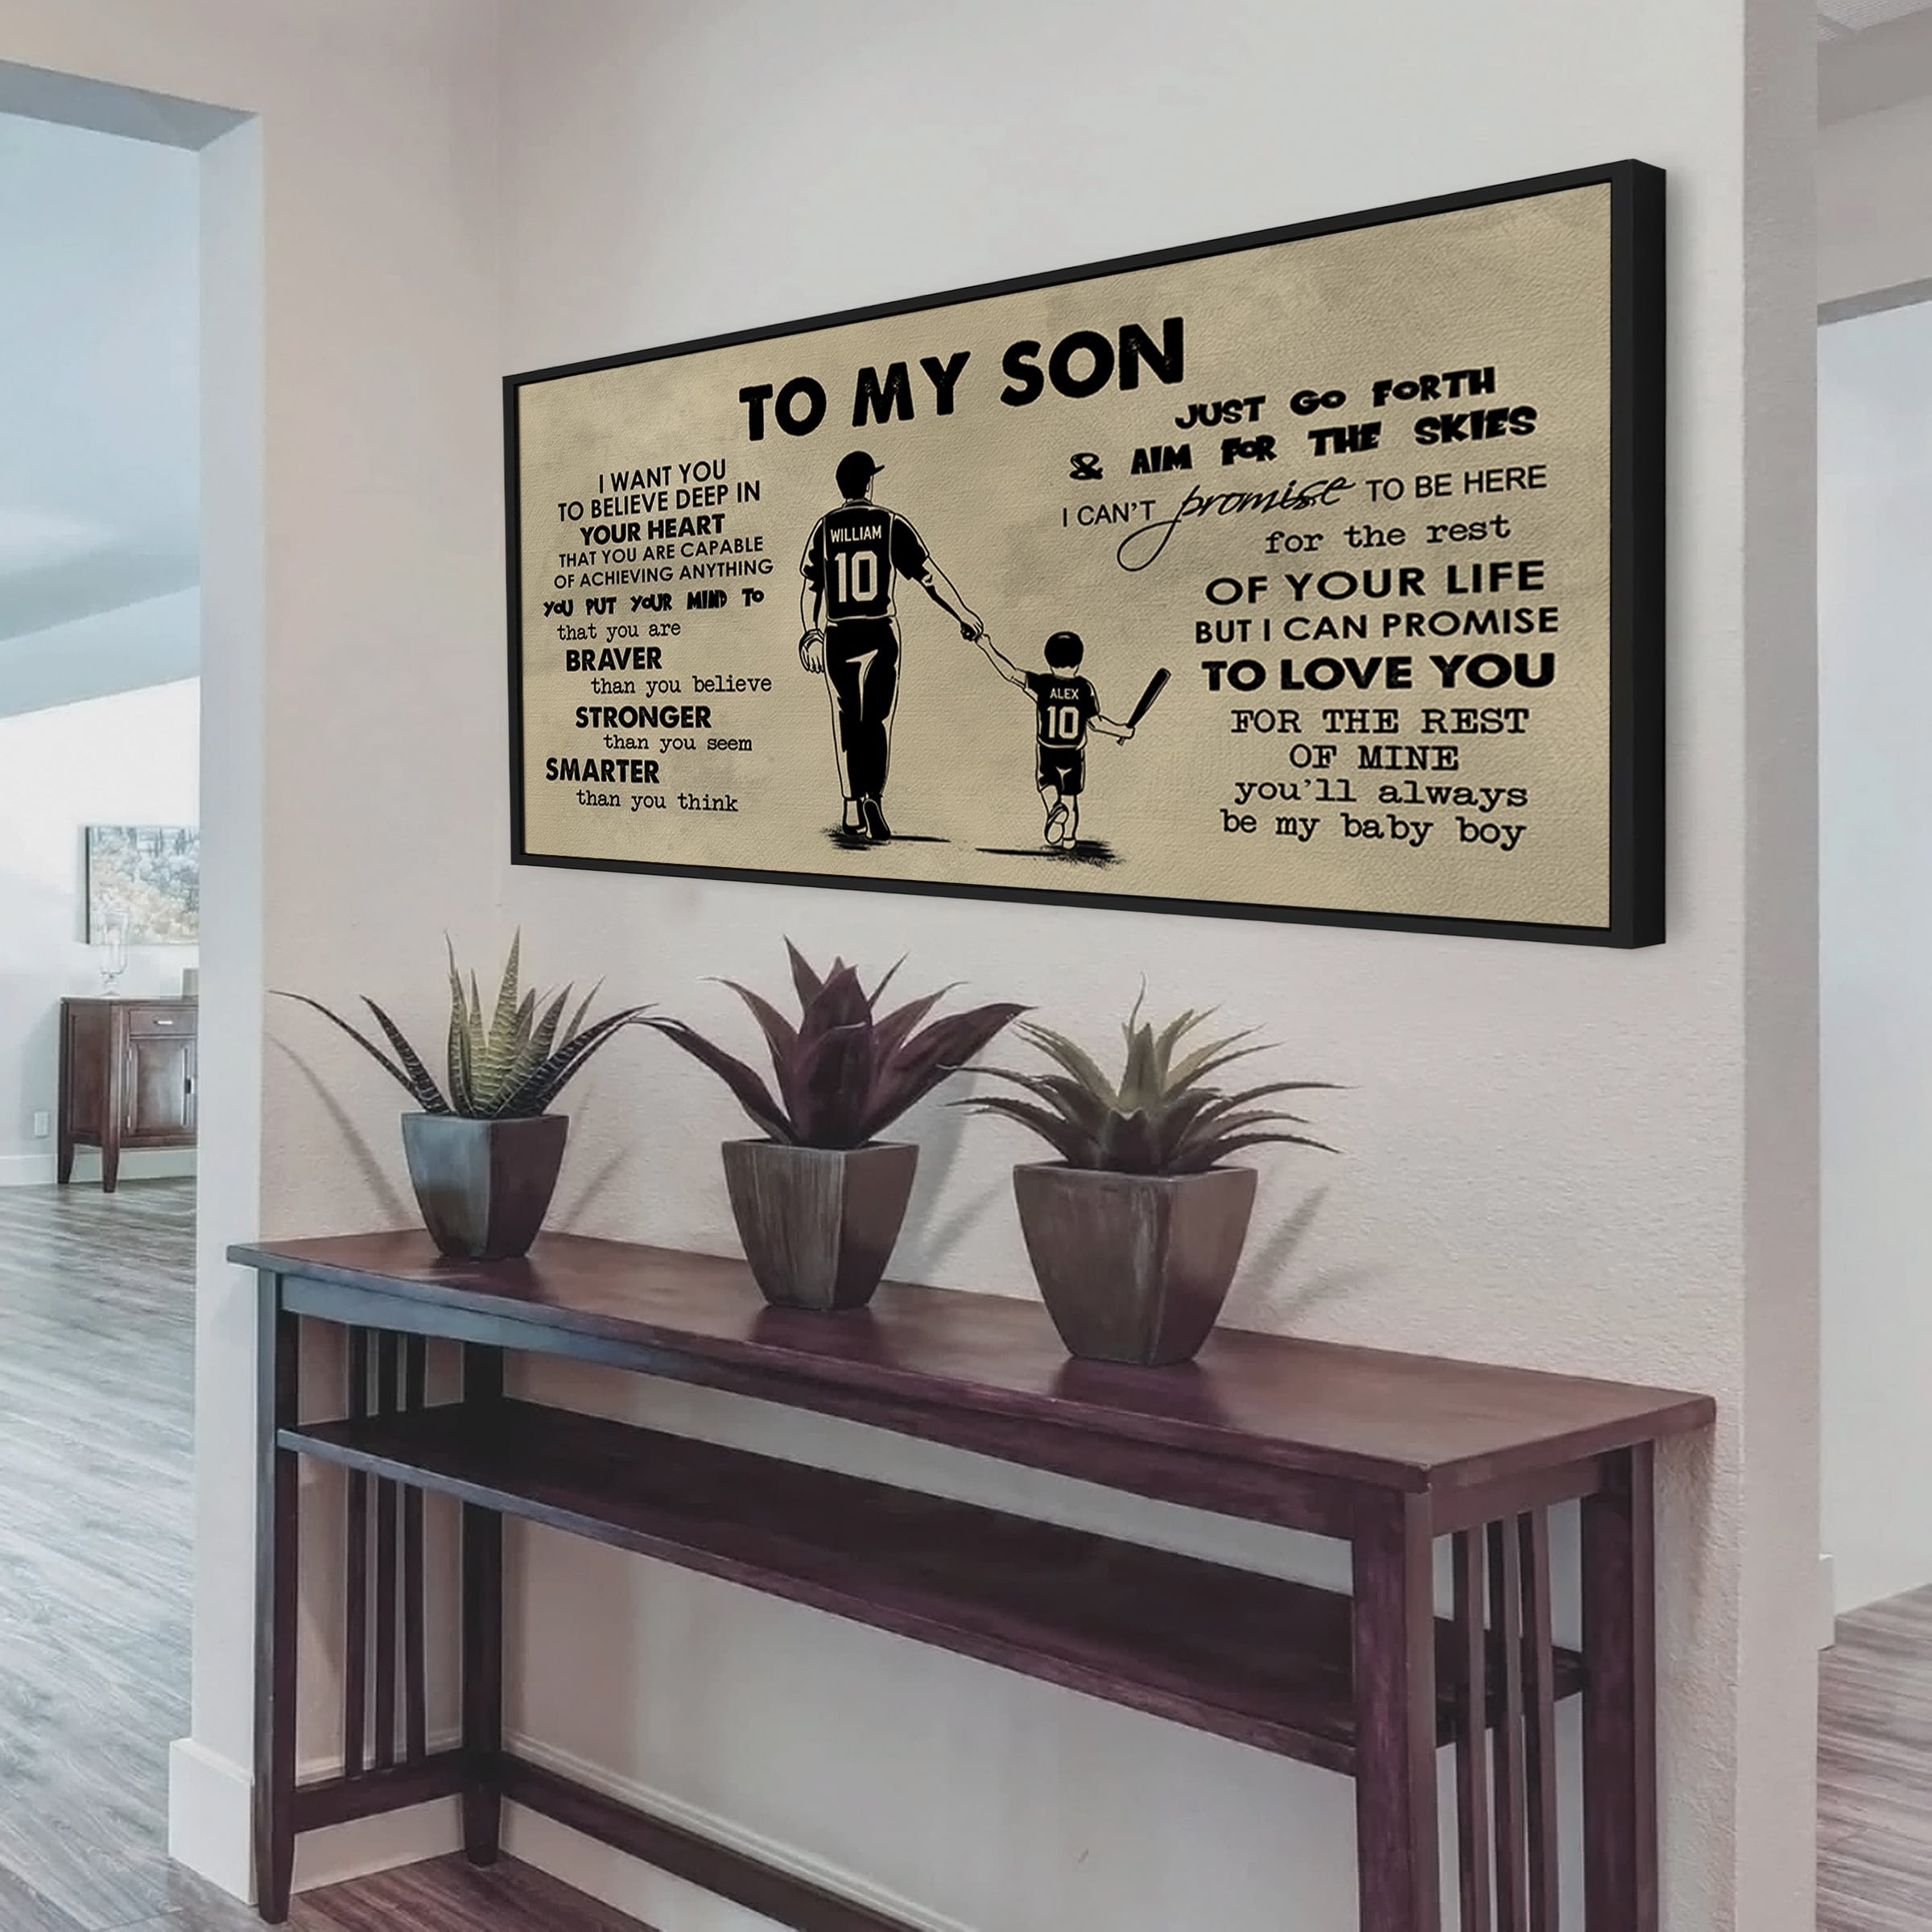 HOCKEY TO MY SON- I WANT YOU TO BELIEVE- CANVAS POSTER